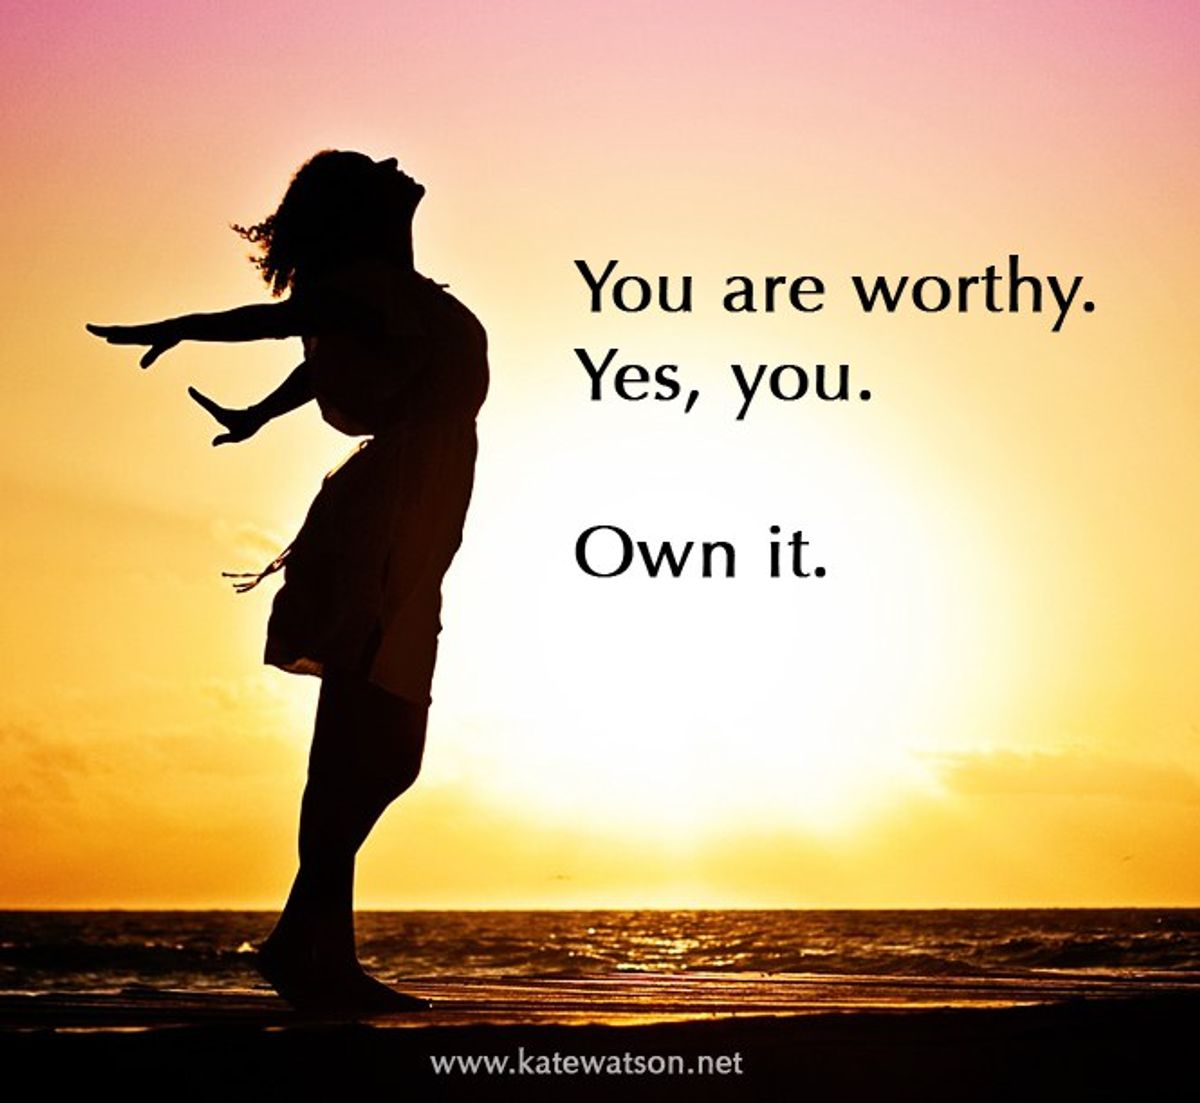 To the Girl That Doesn't Feel Worthy: You Are